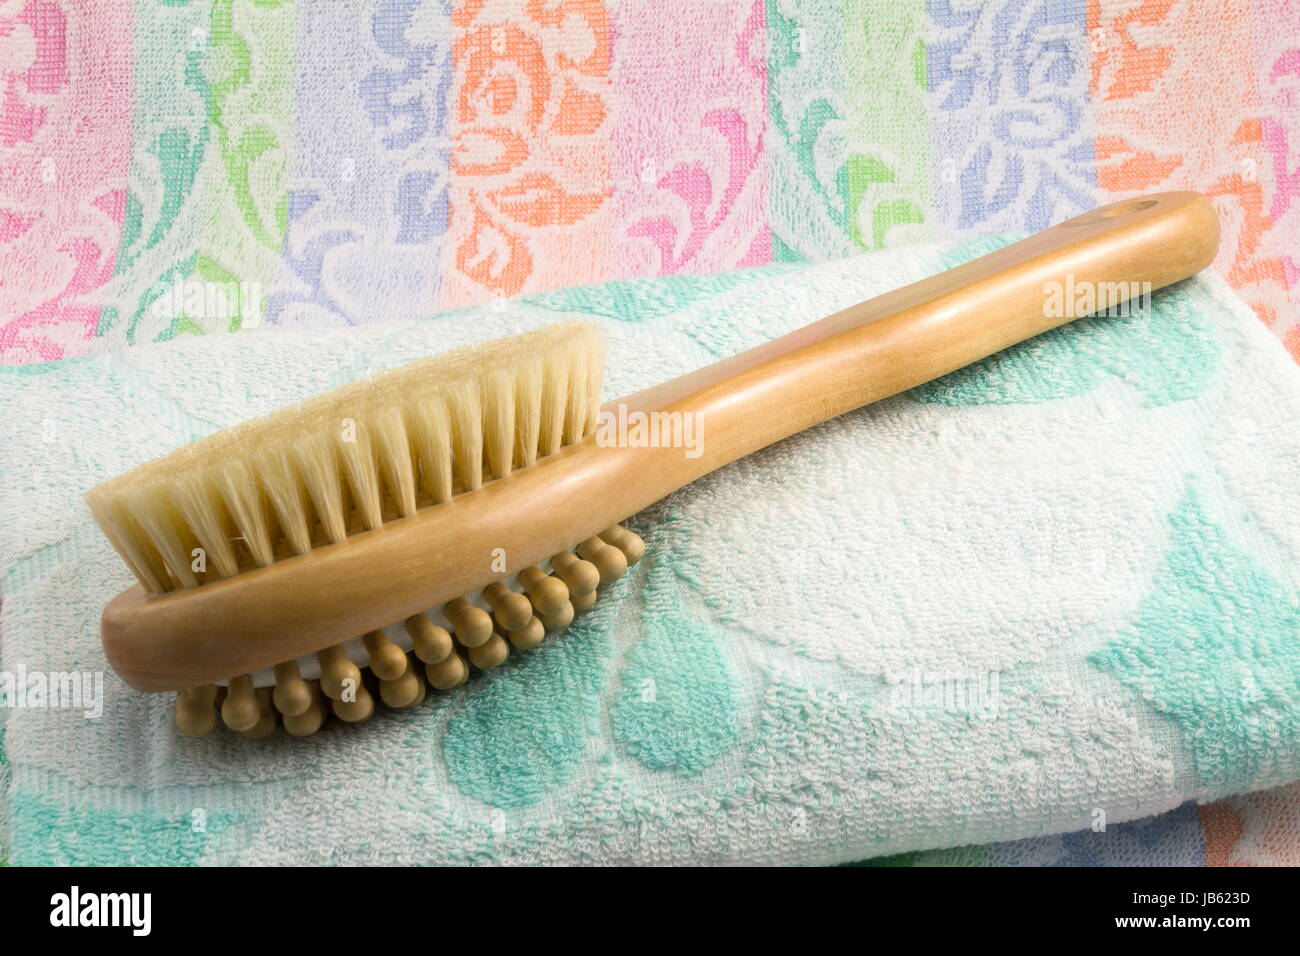 Wooden light brown brush with the long handle for body massage. Has wooden balls for massage and a rigid bristle for skin massage. Terry towel with an ornament. Stock Photo